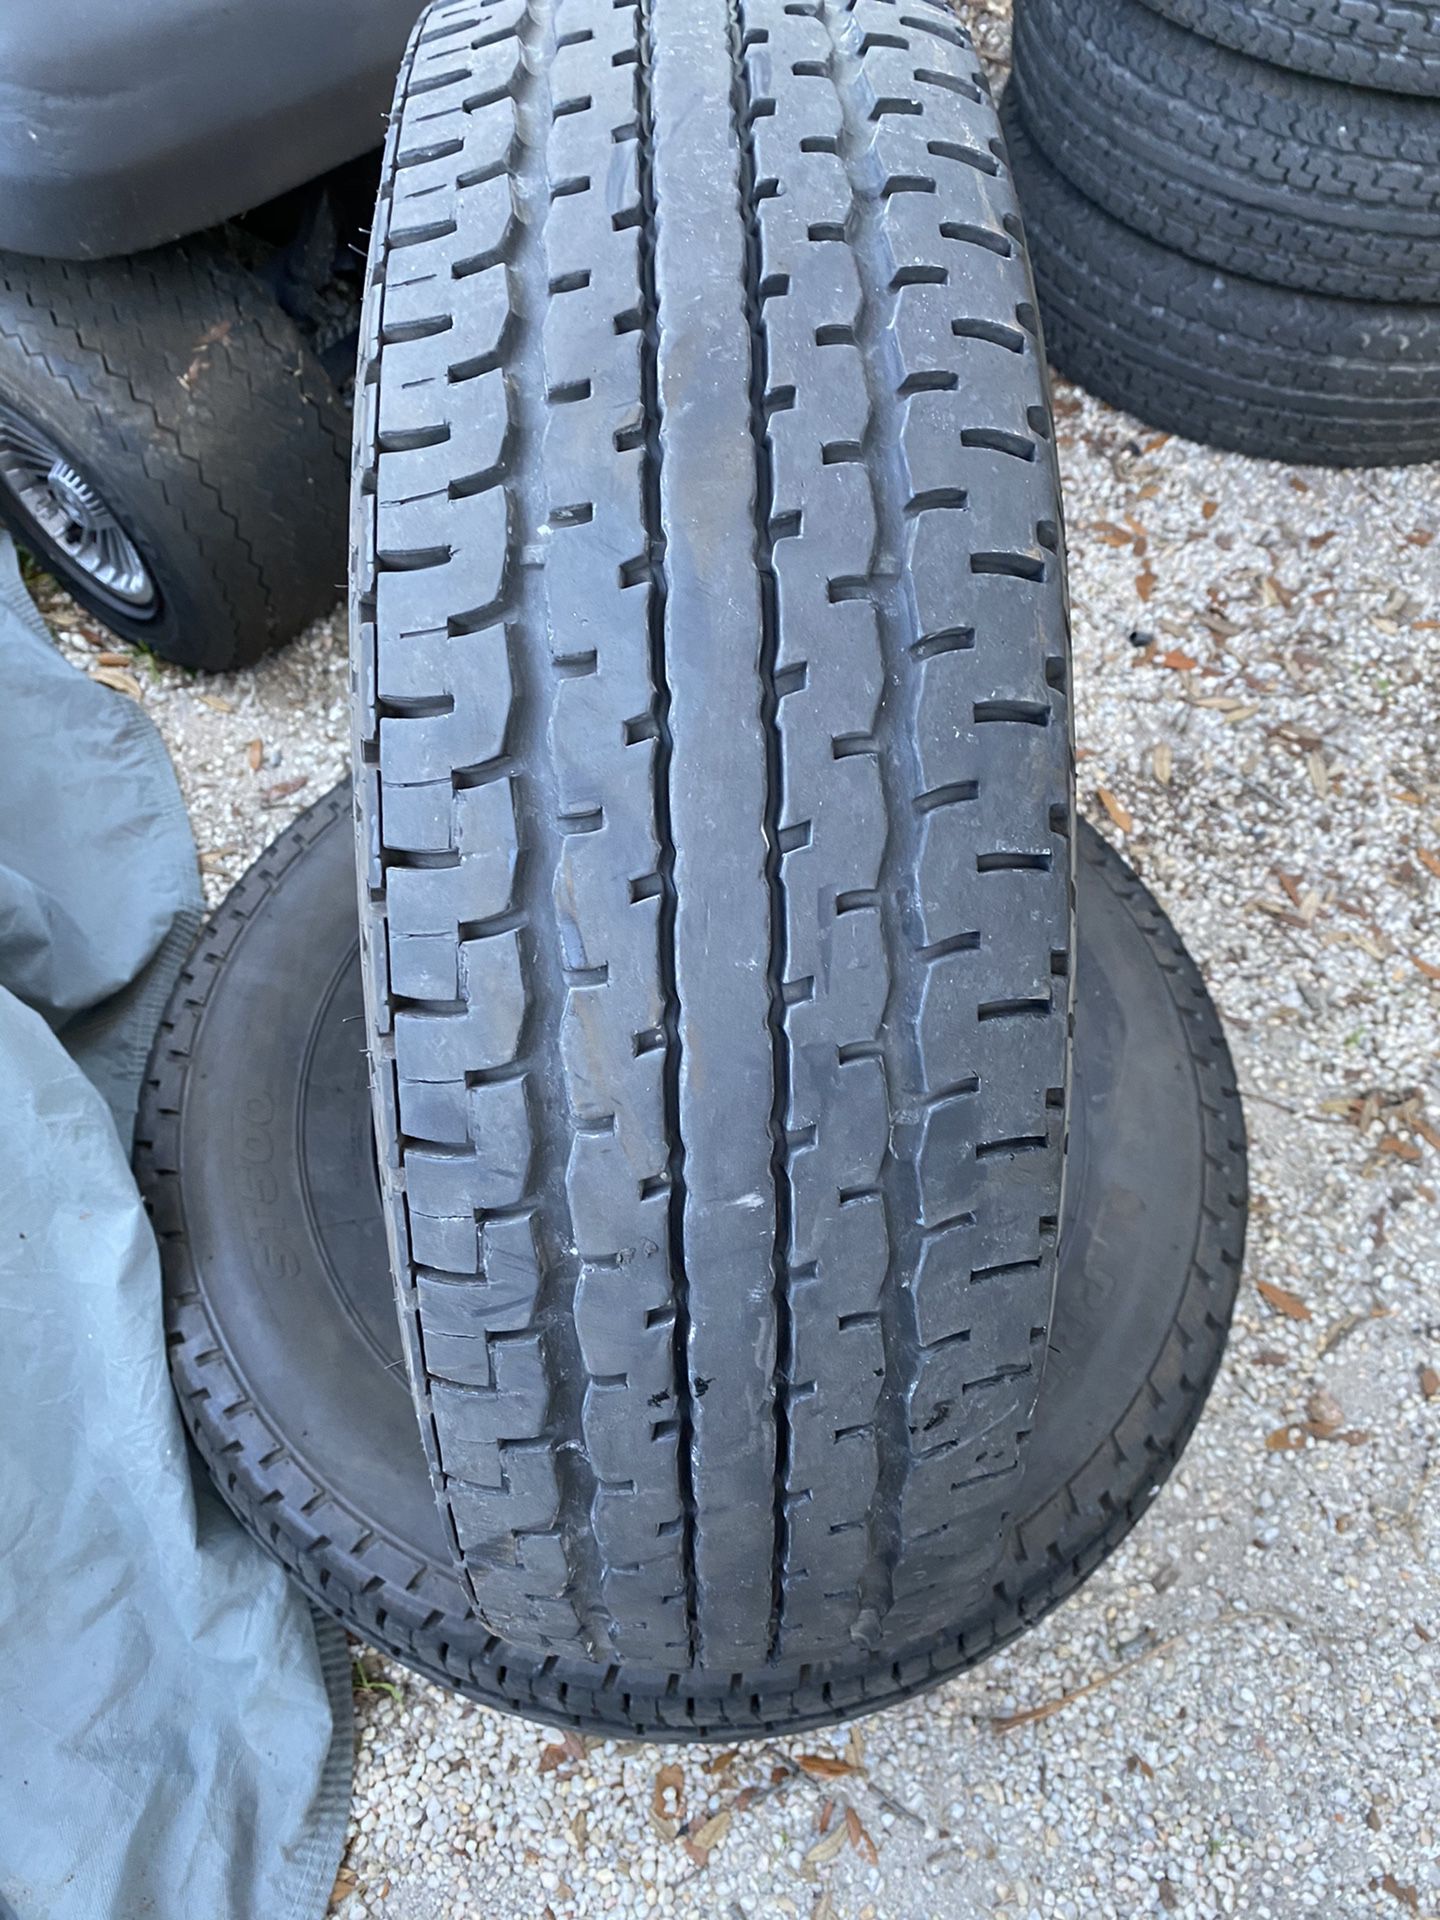 2) 235/80/16 Primewell ST 500 Steel Belted Trailer Tires